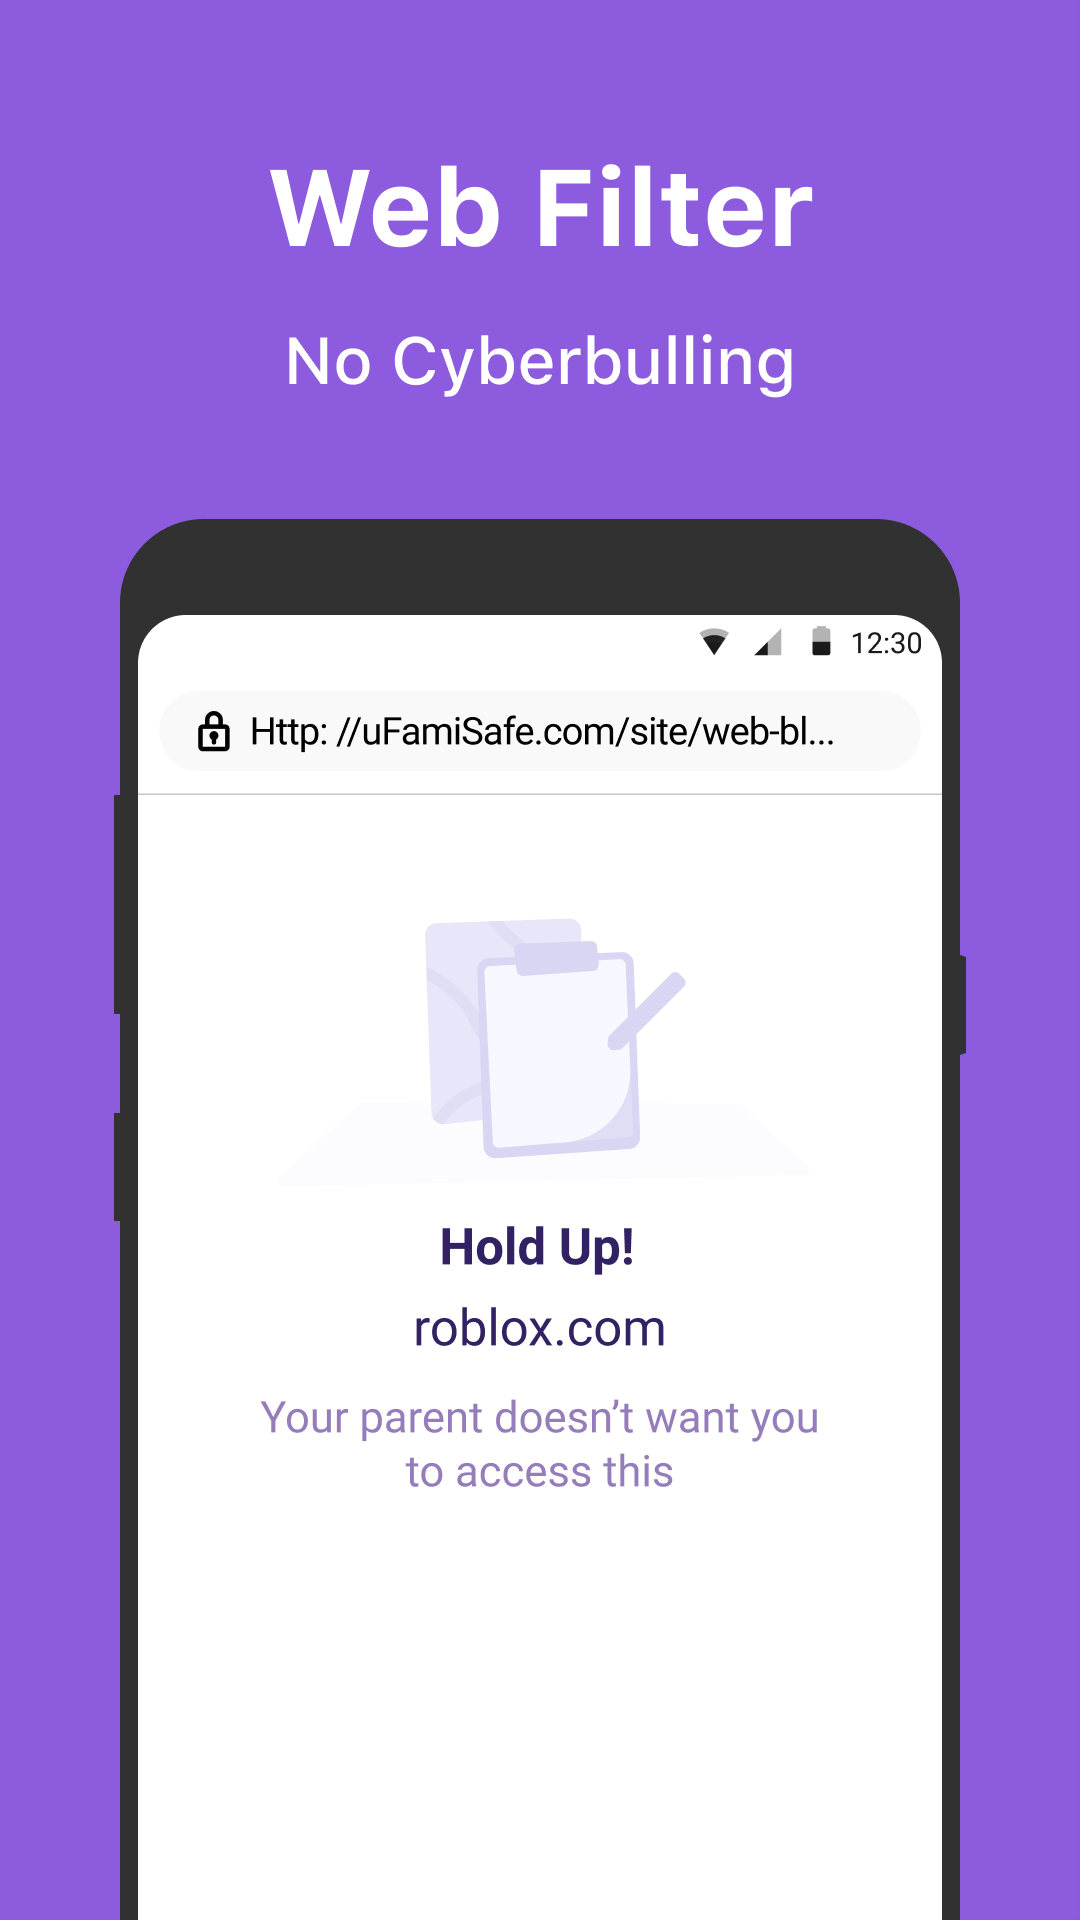 Famisafe App The Ultimate Parental Control App For Your Kids Tweaktown - parents ultimate guide to roblox great apps for kids